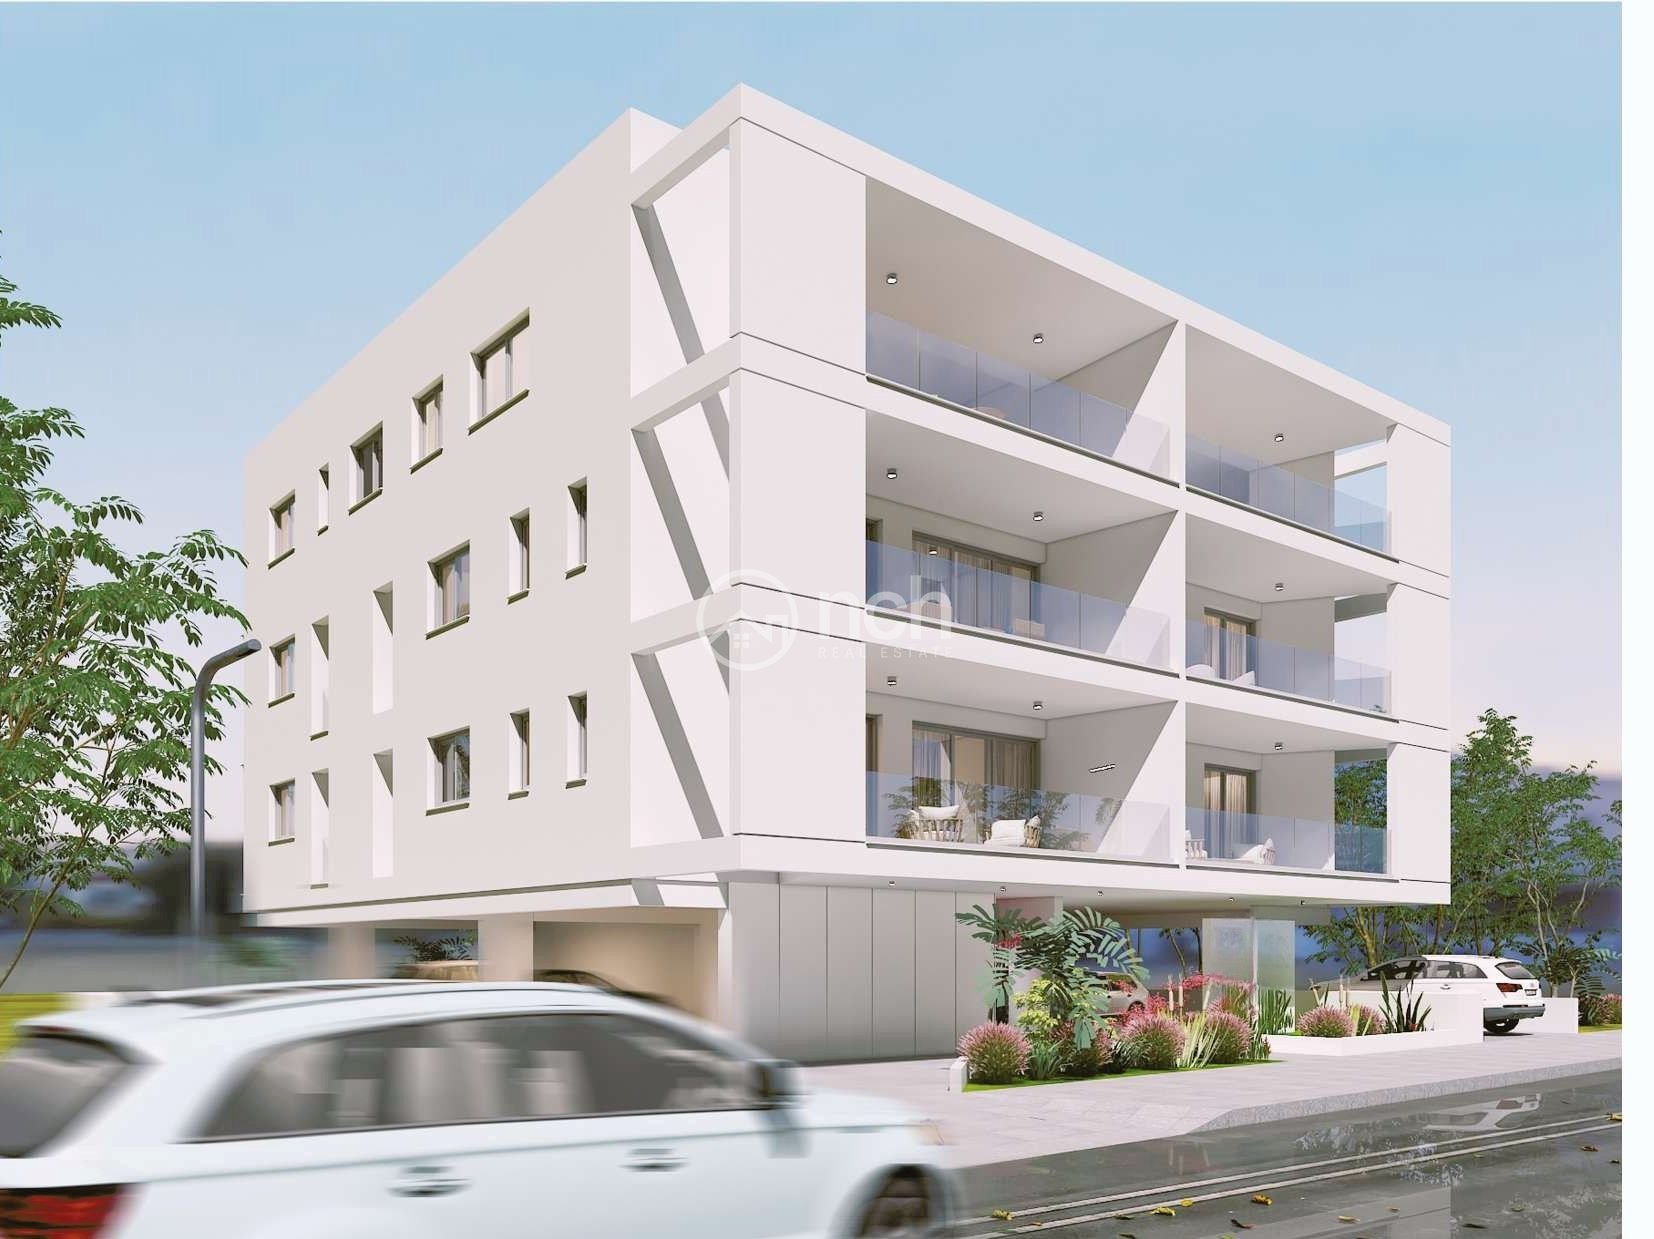 3 Bedroom Apartment for Sale in Strovolos – Chryseleousa, Nicosia District